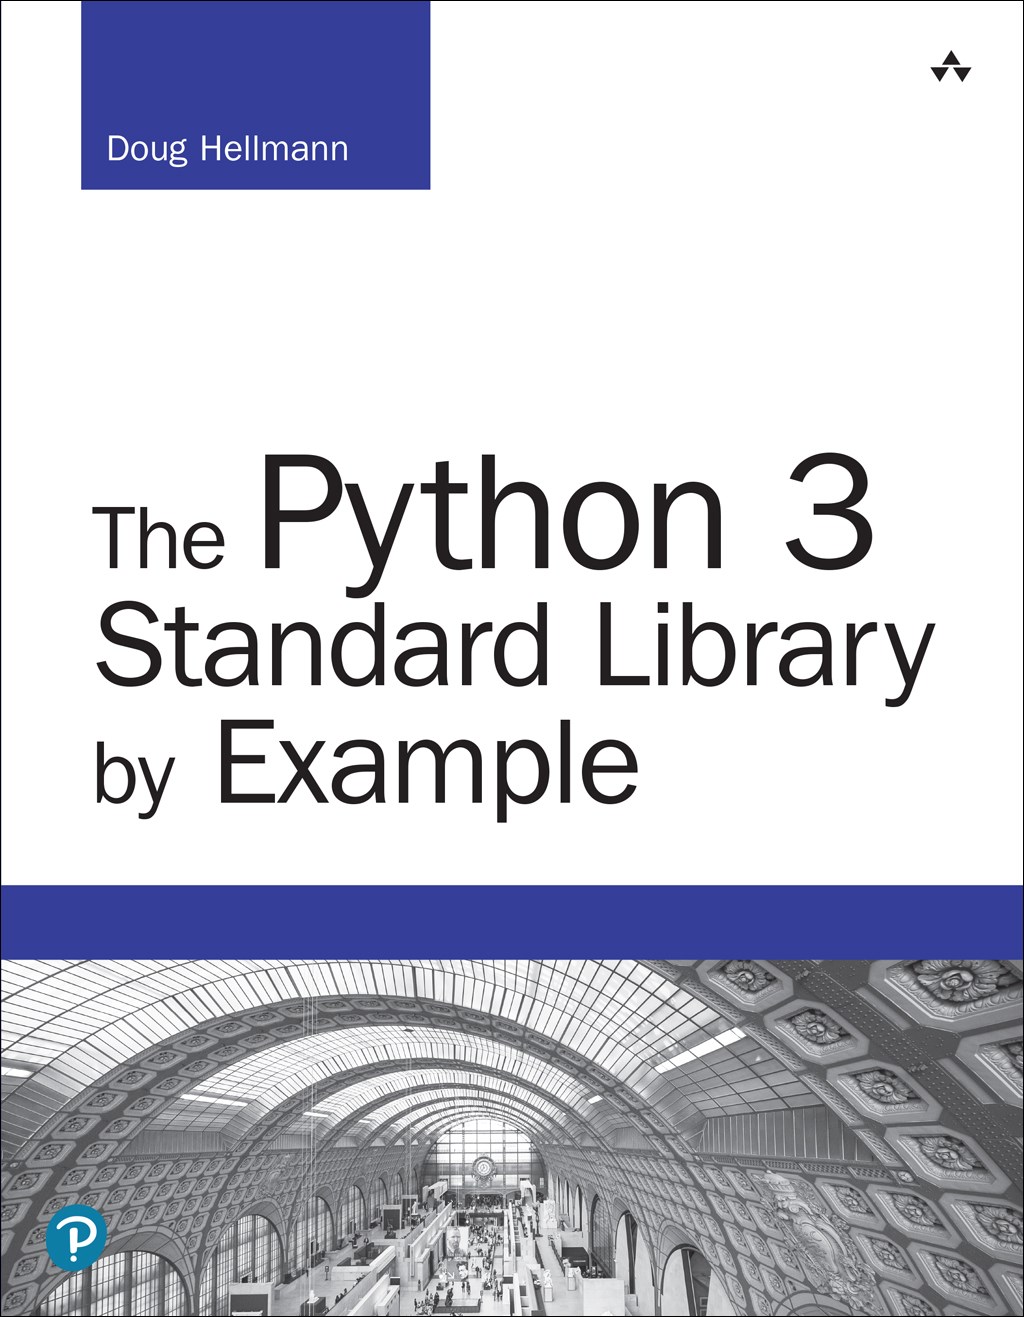 Python 3 Standard Library by Example, The